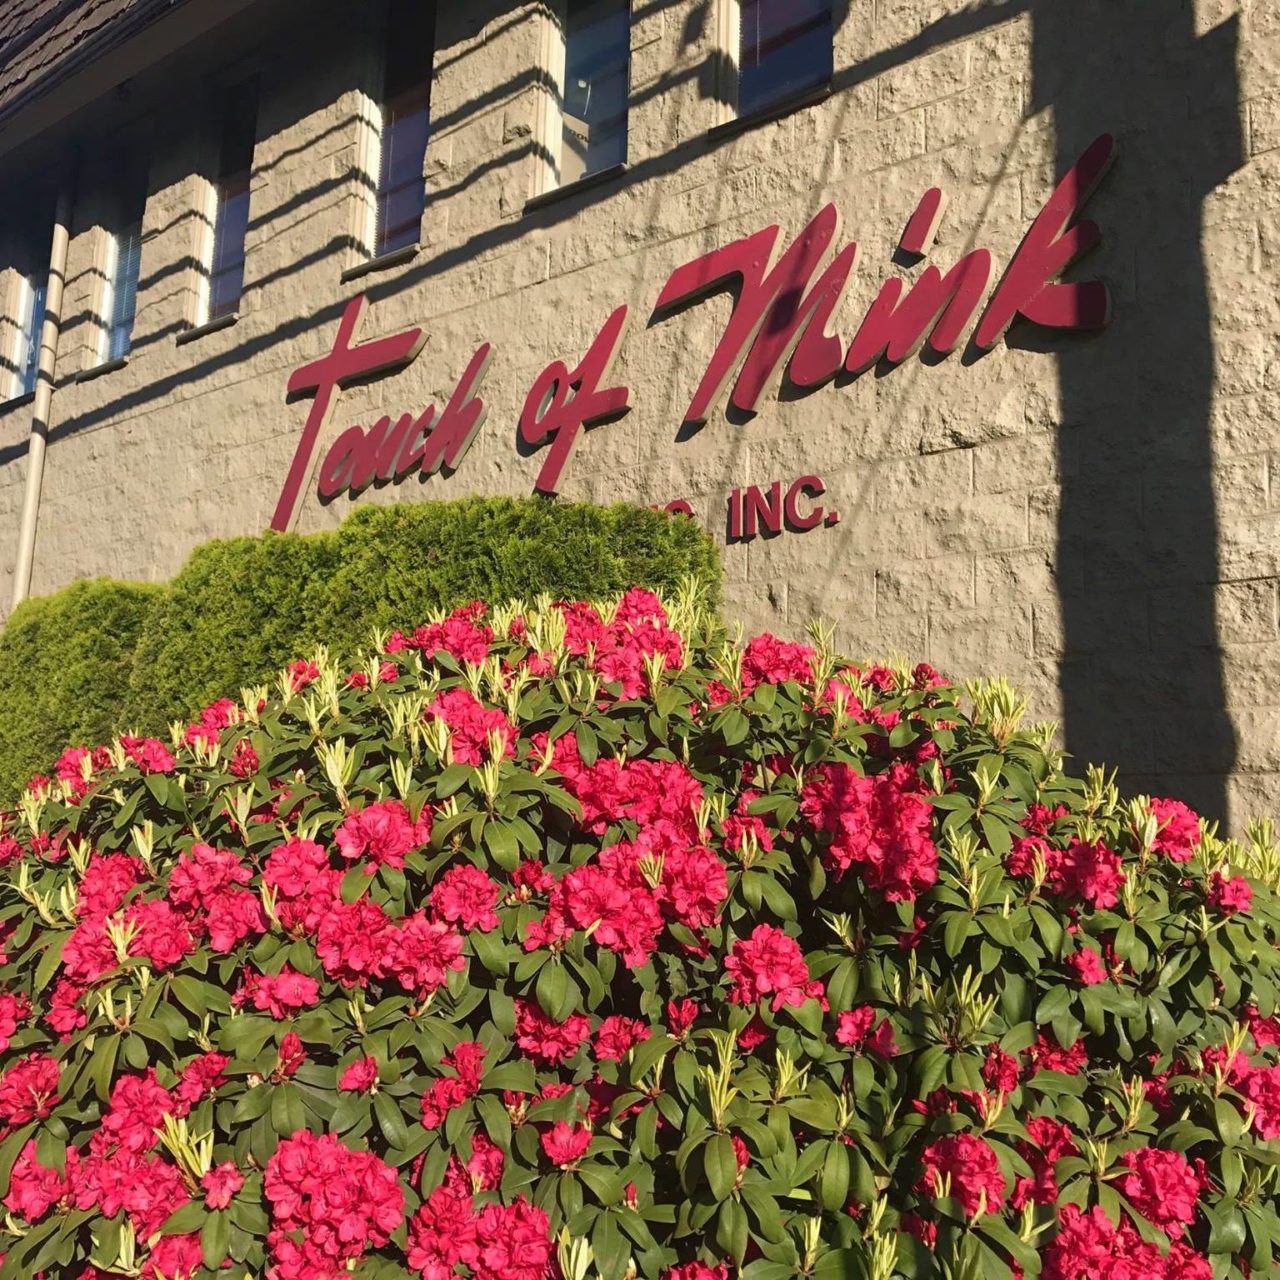 Touch of Mink sign on outside of building with pink flowering bushes